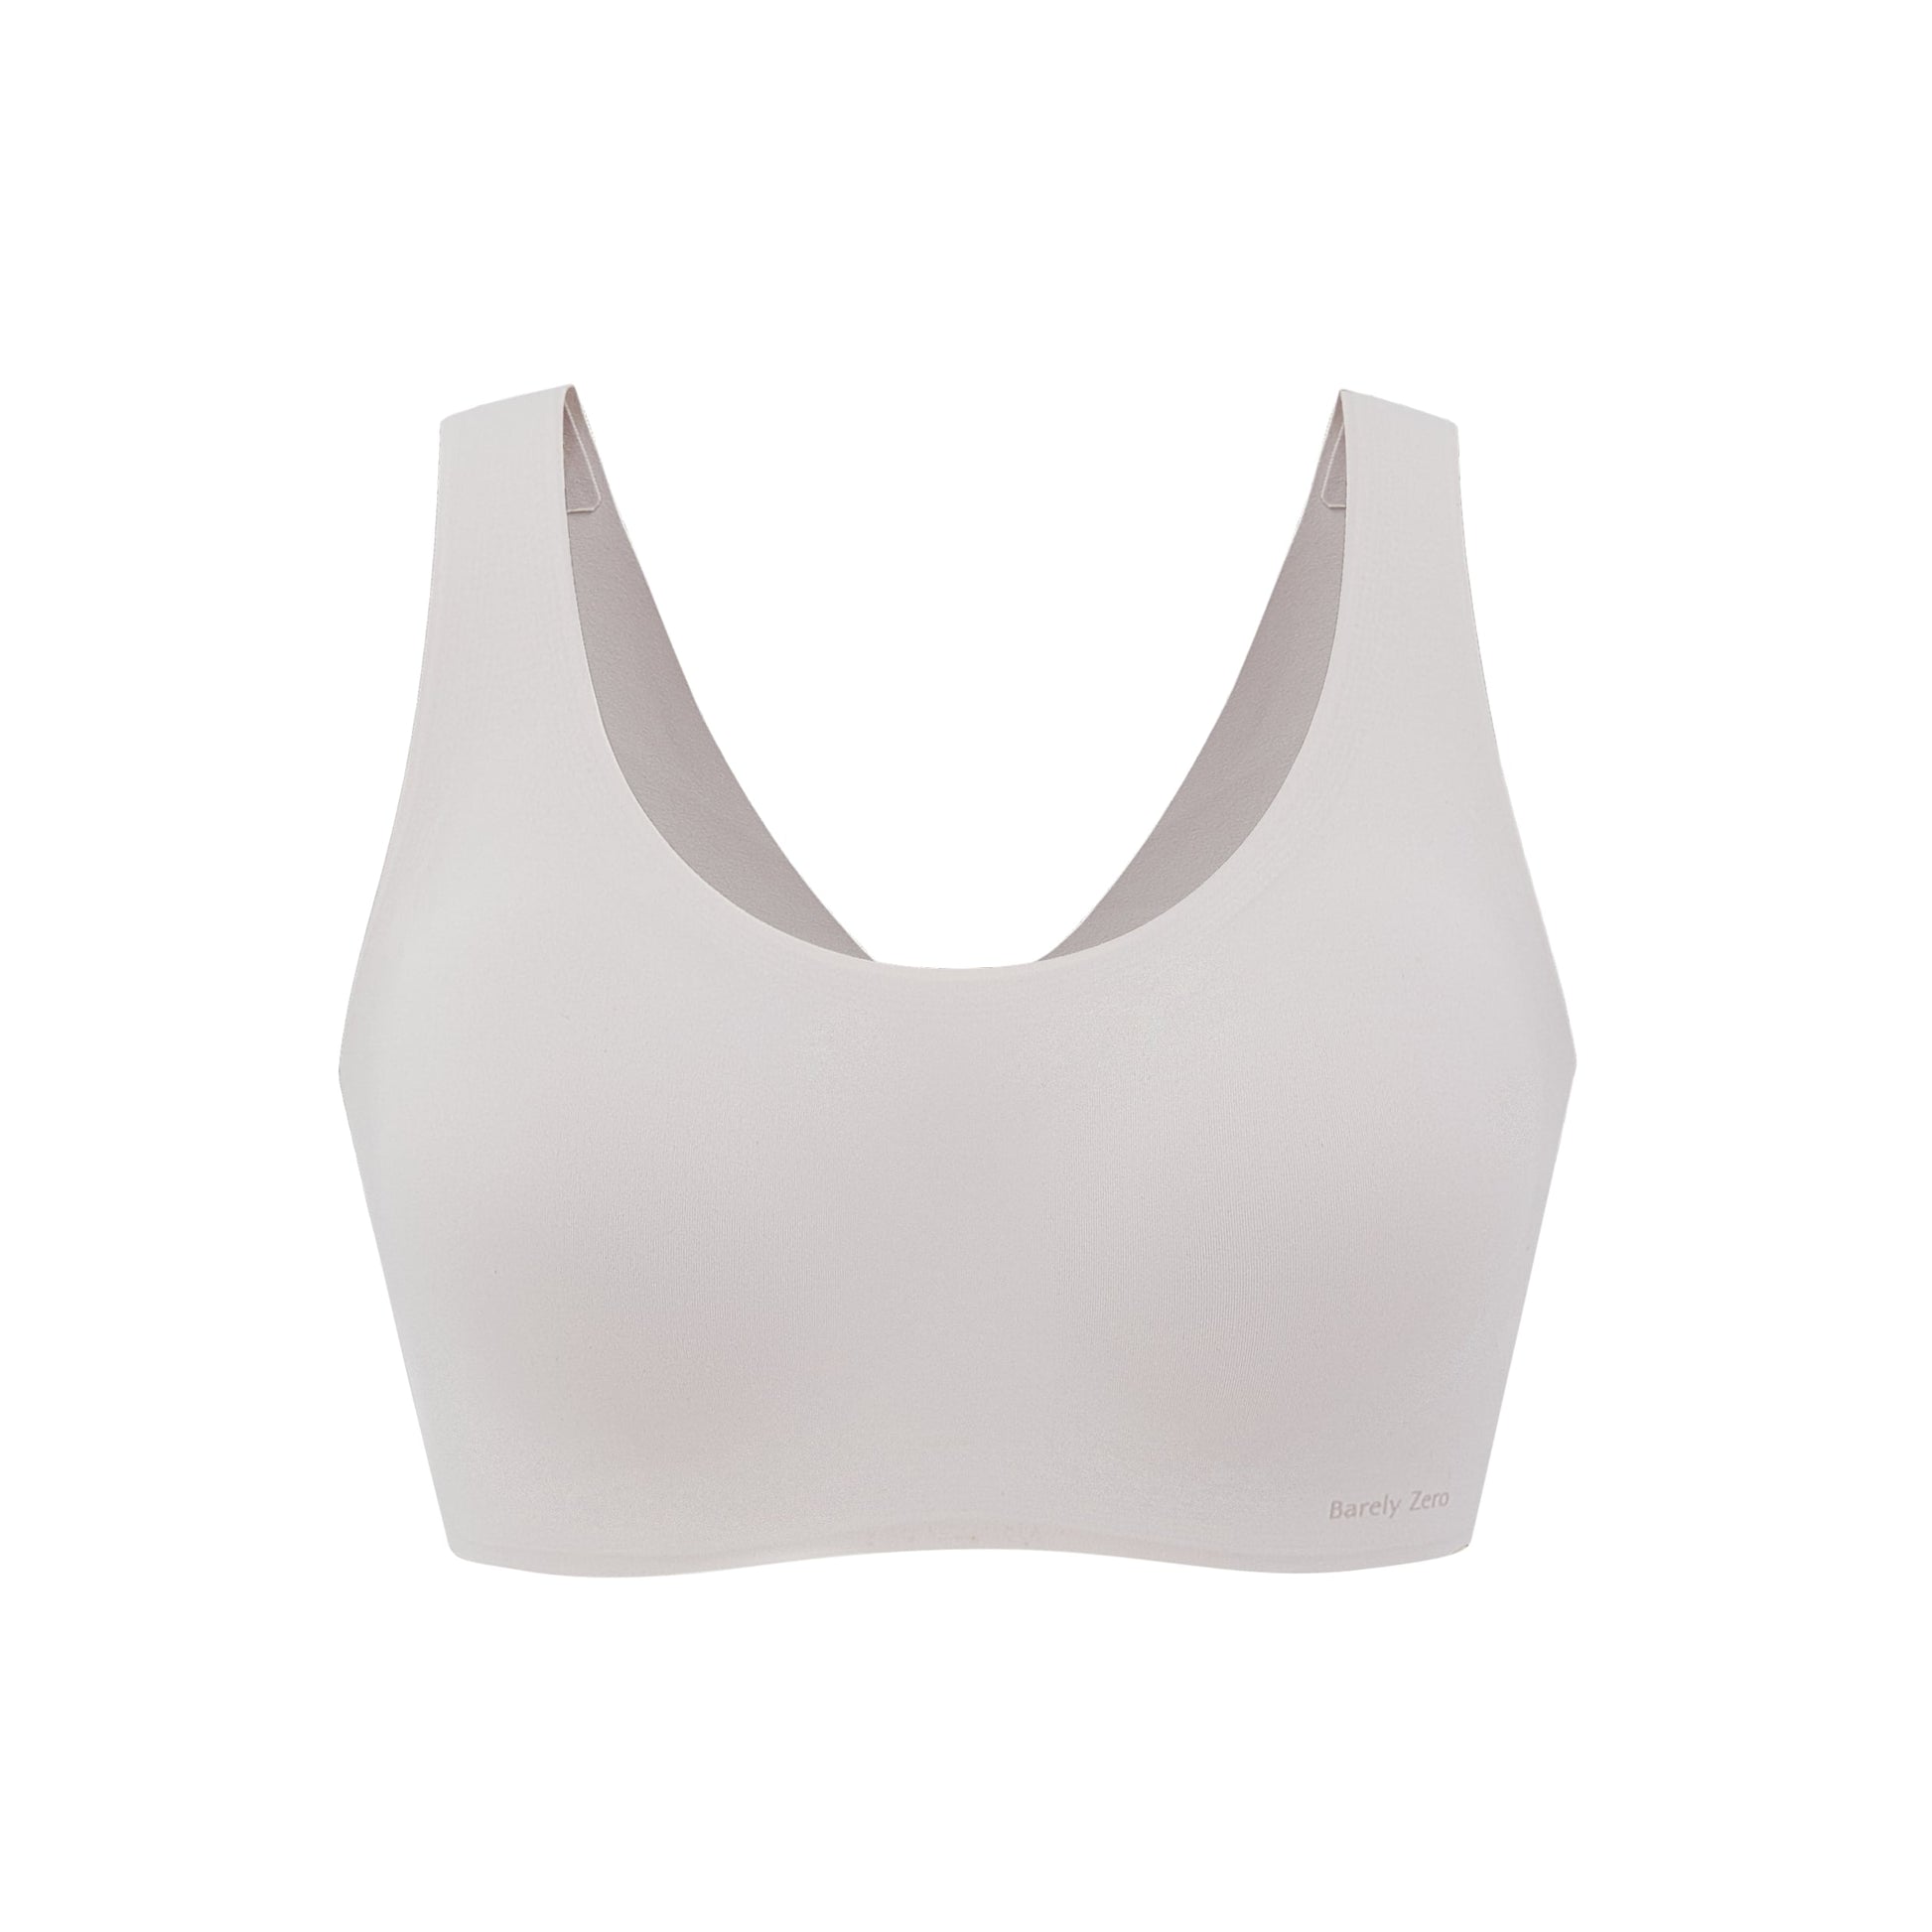 Flat lay image of off-white bra with thick straps